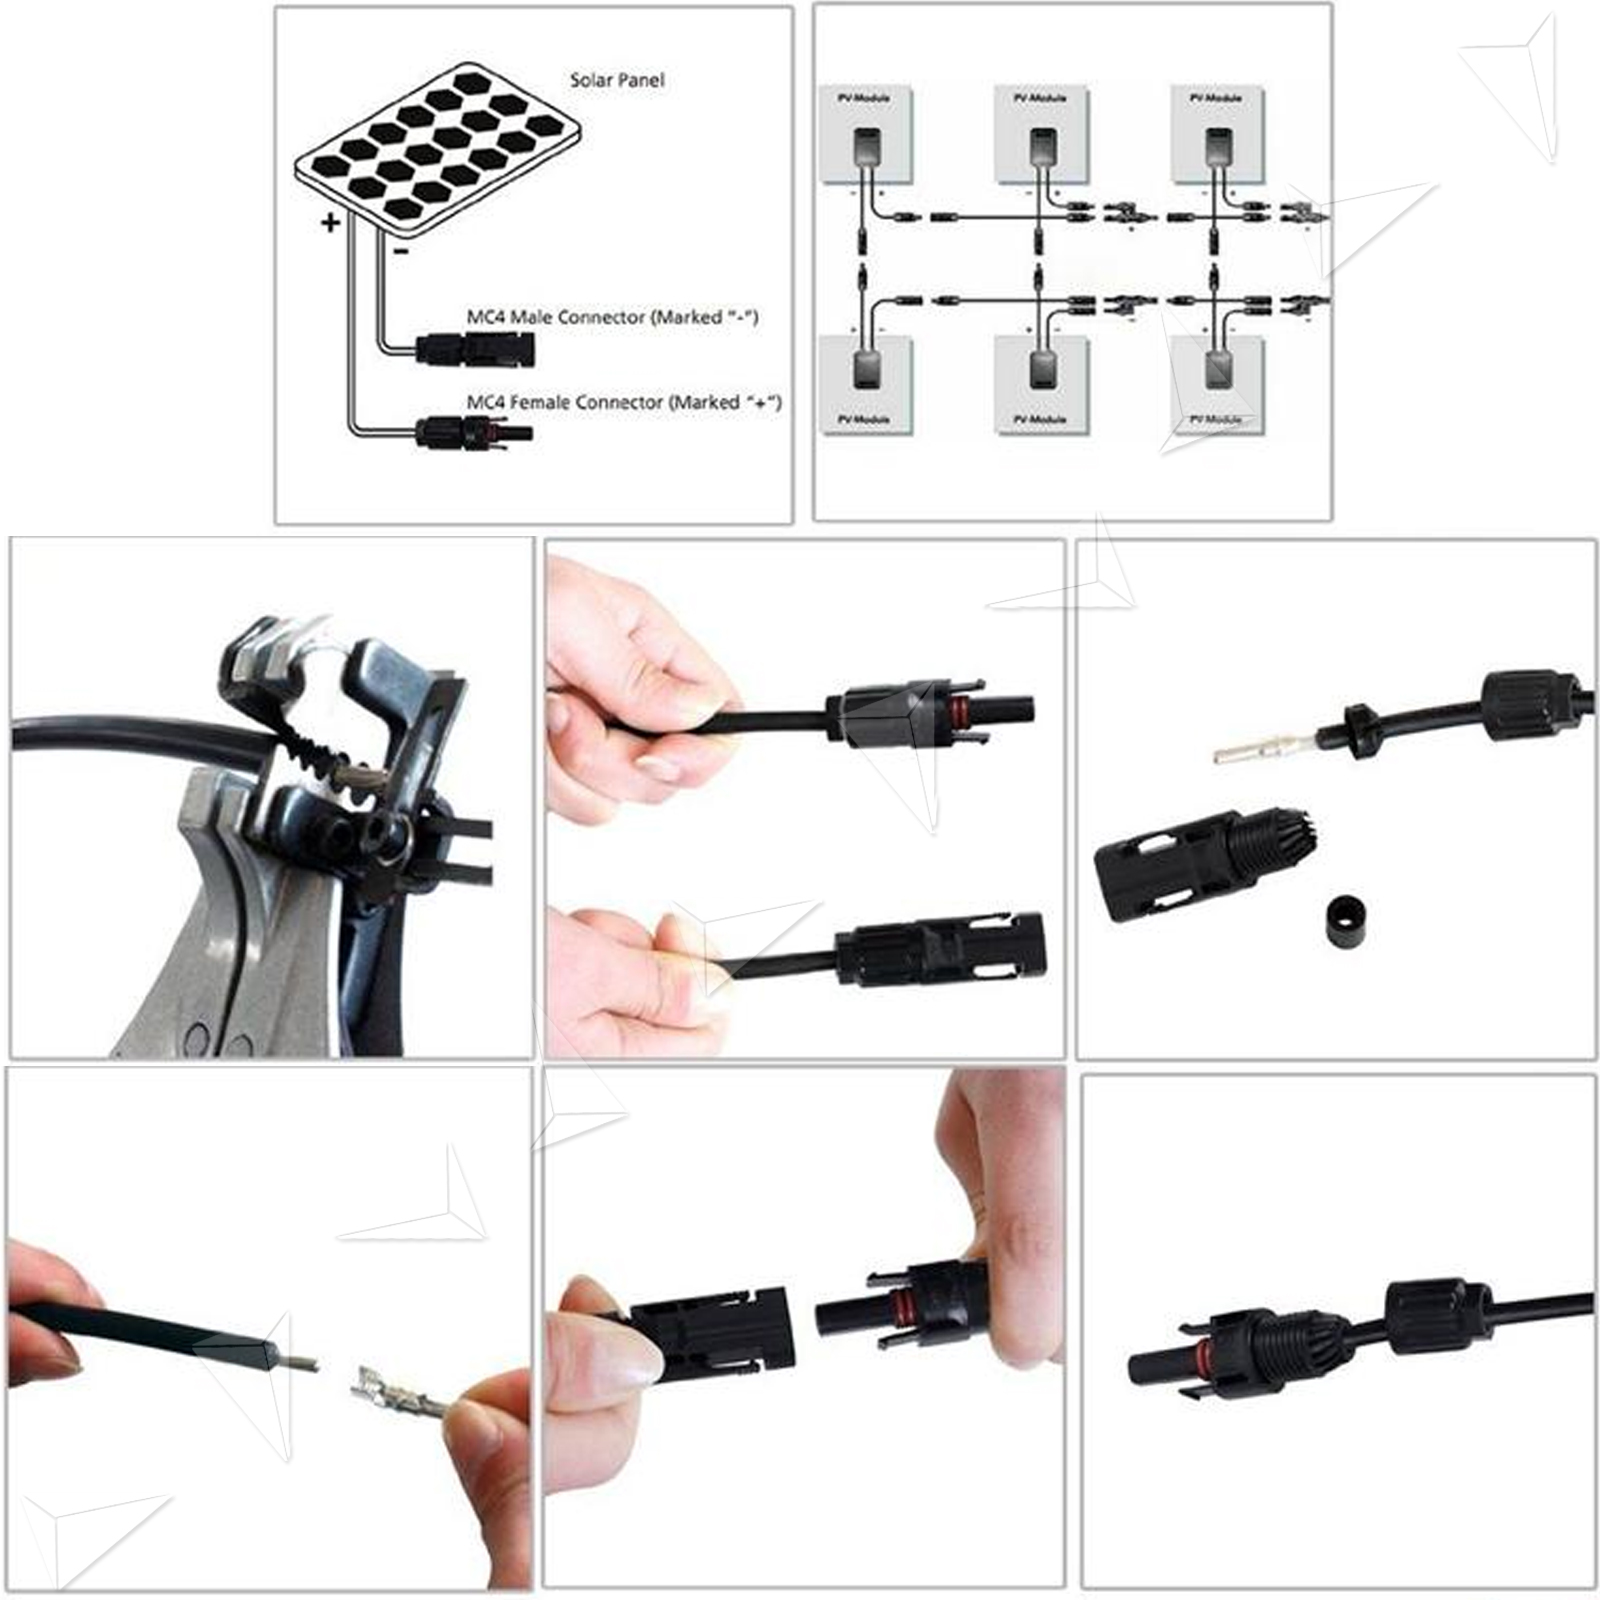 10 Sets Of Male Female Mc4 Solar Panel Connectors 30a For Pv Solar Panel Cable 702921742709 Ebay